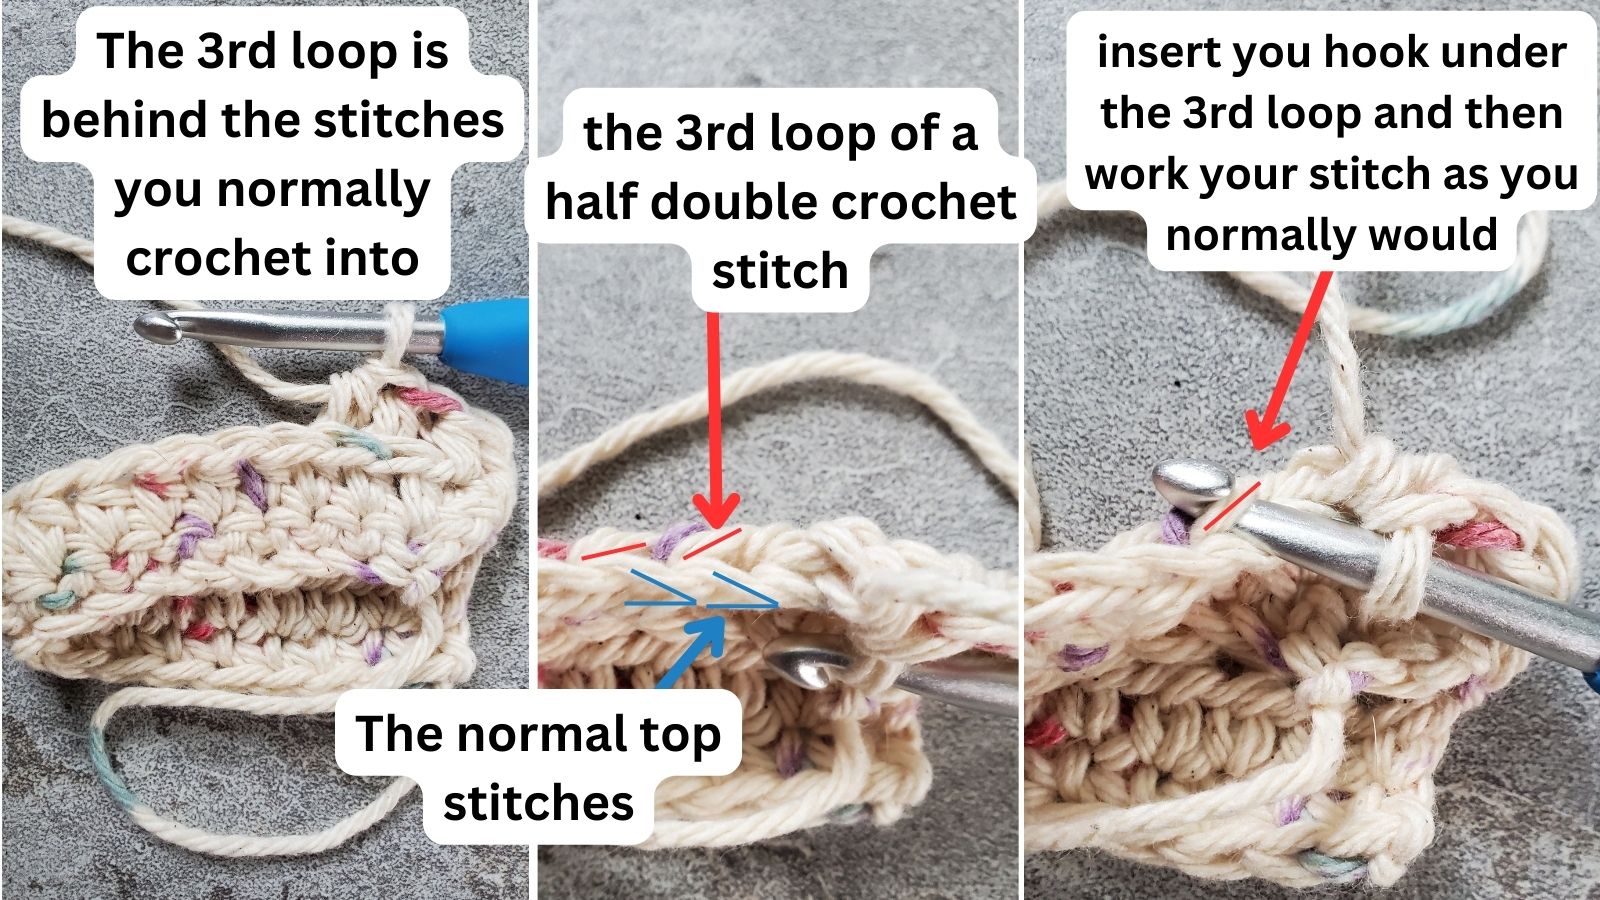 Finding the 3rd loop of a crochet stitch